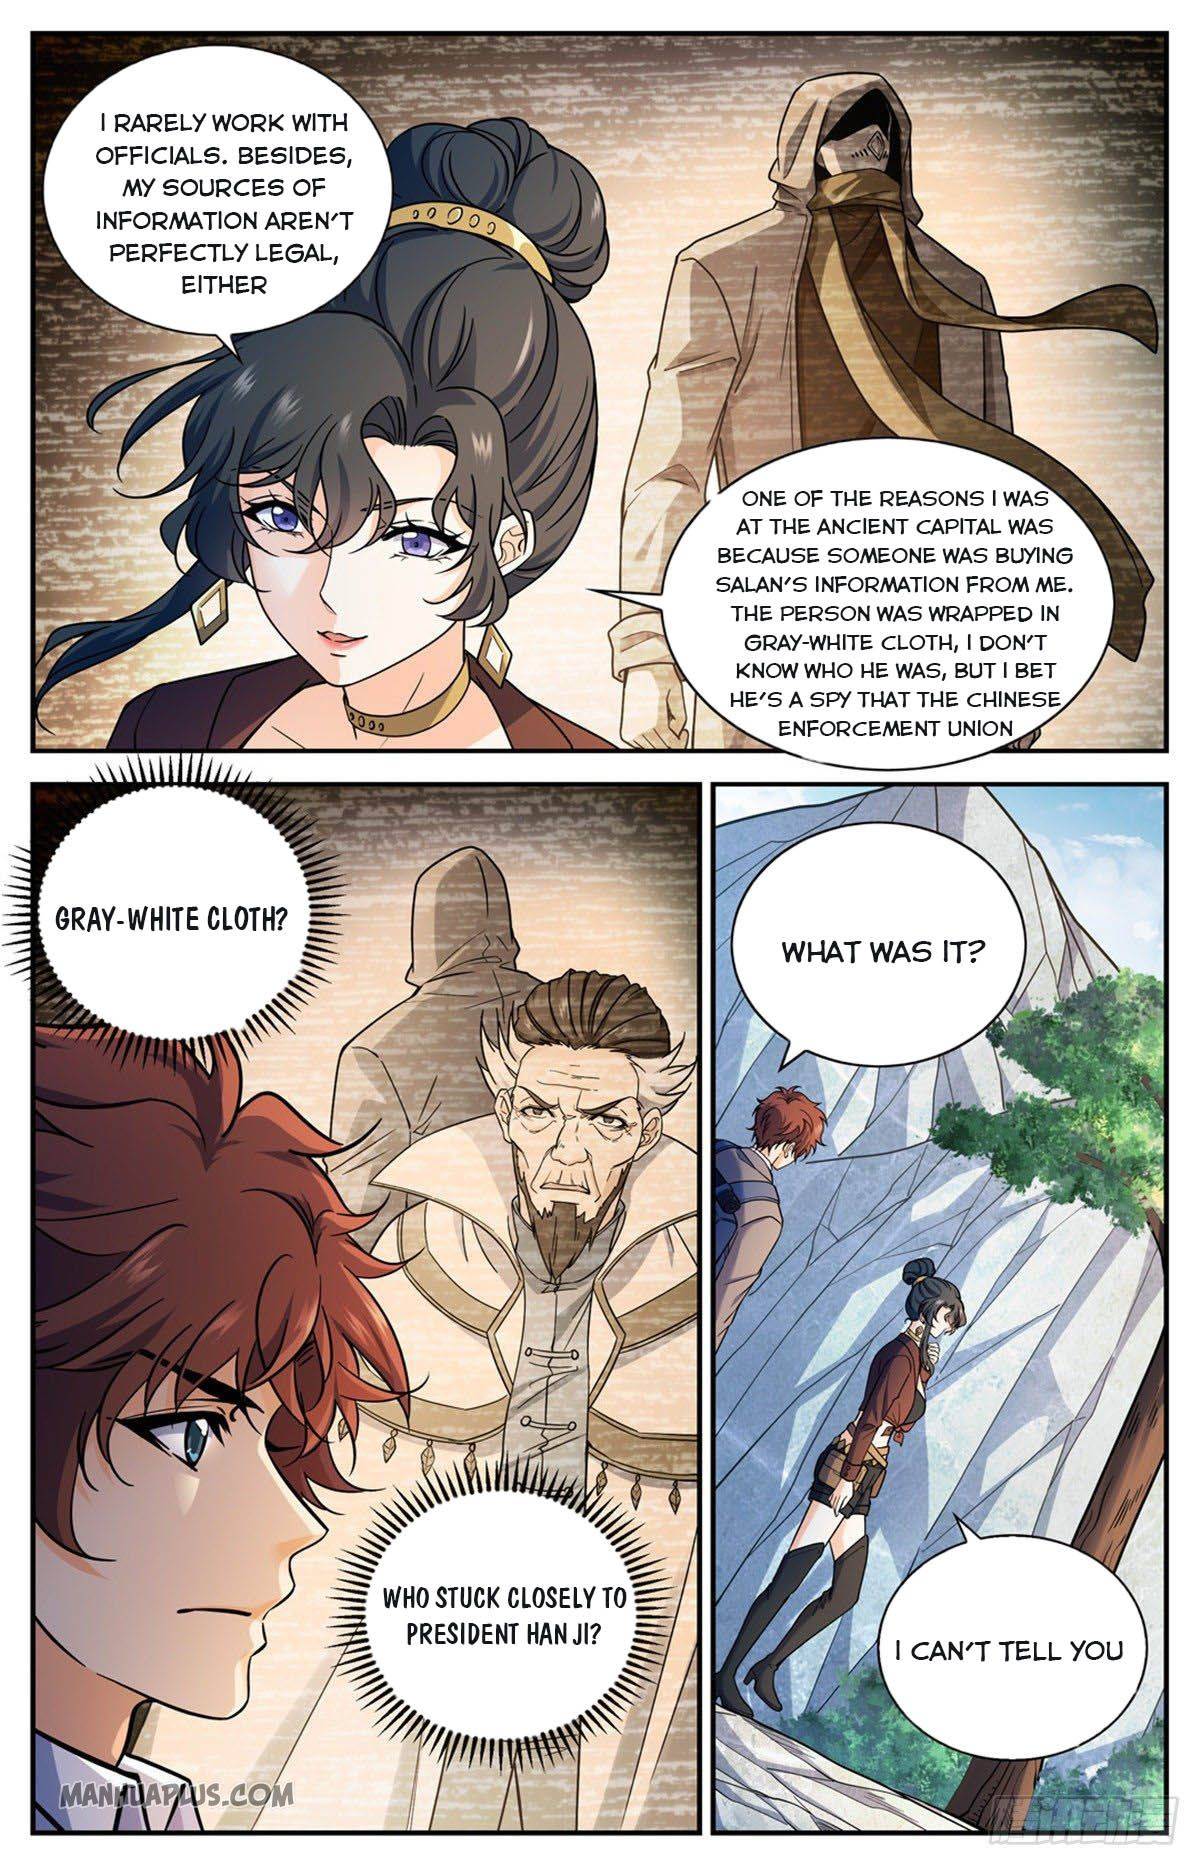 Versatile Mage chapter 673 page 9